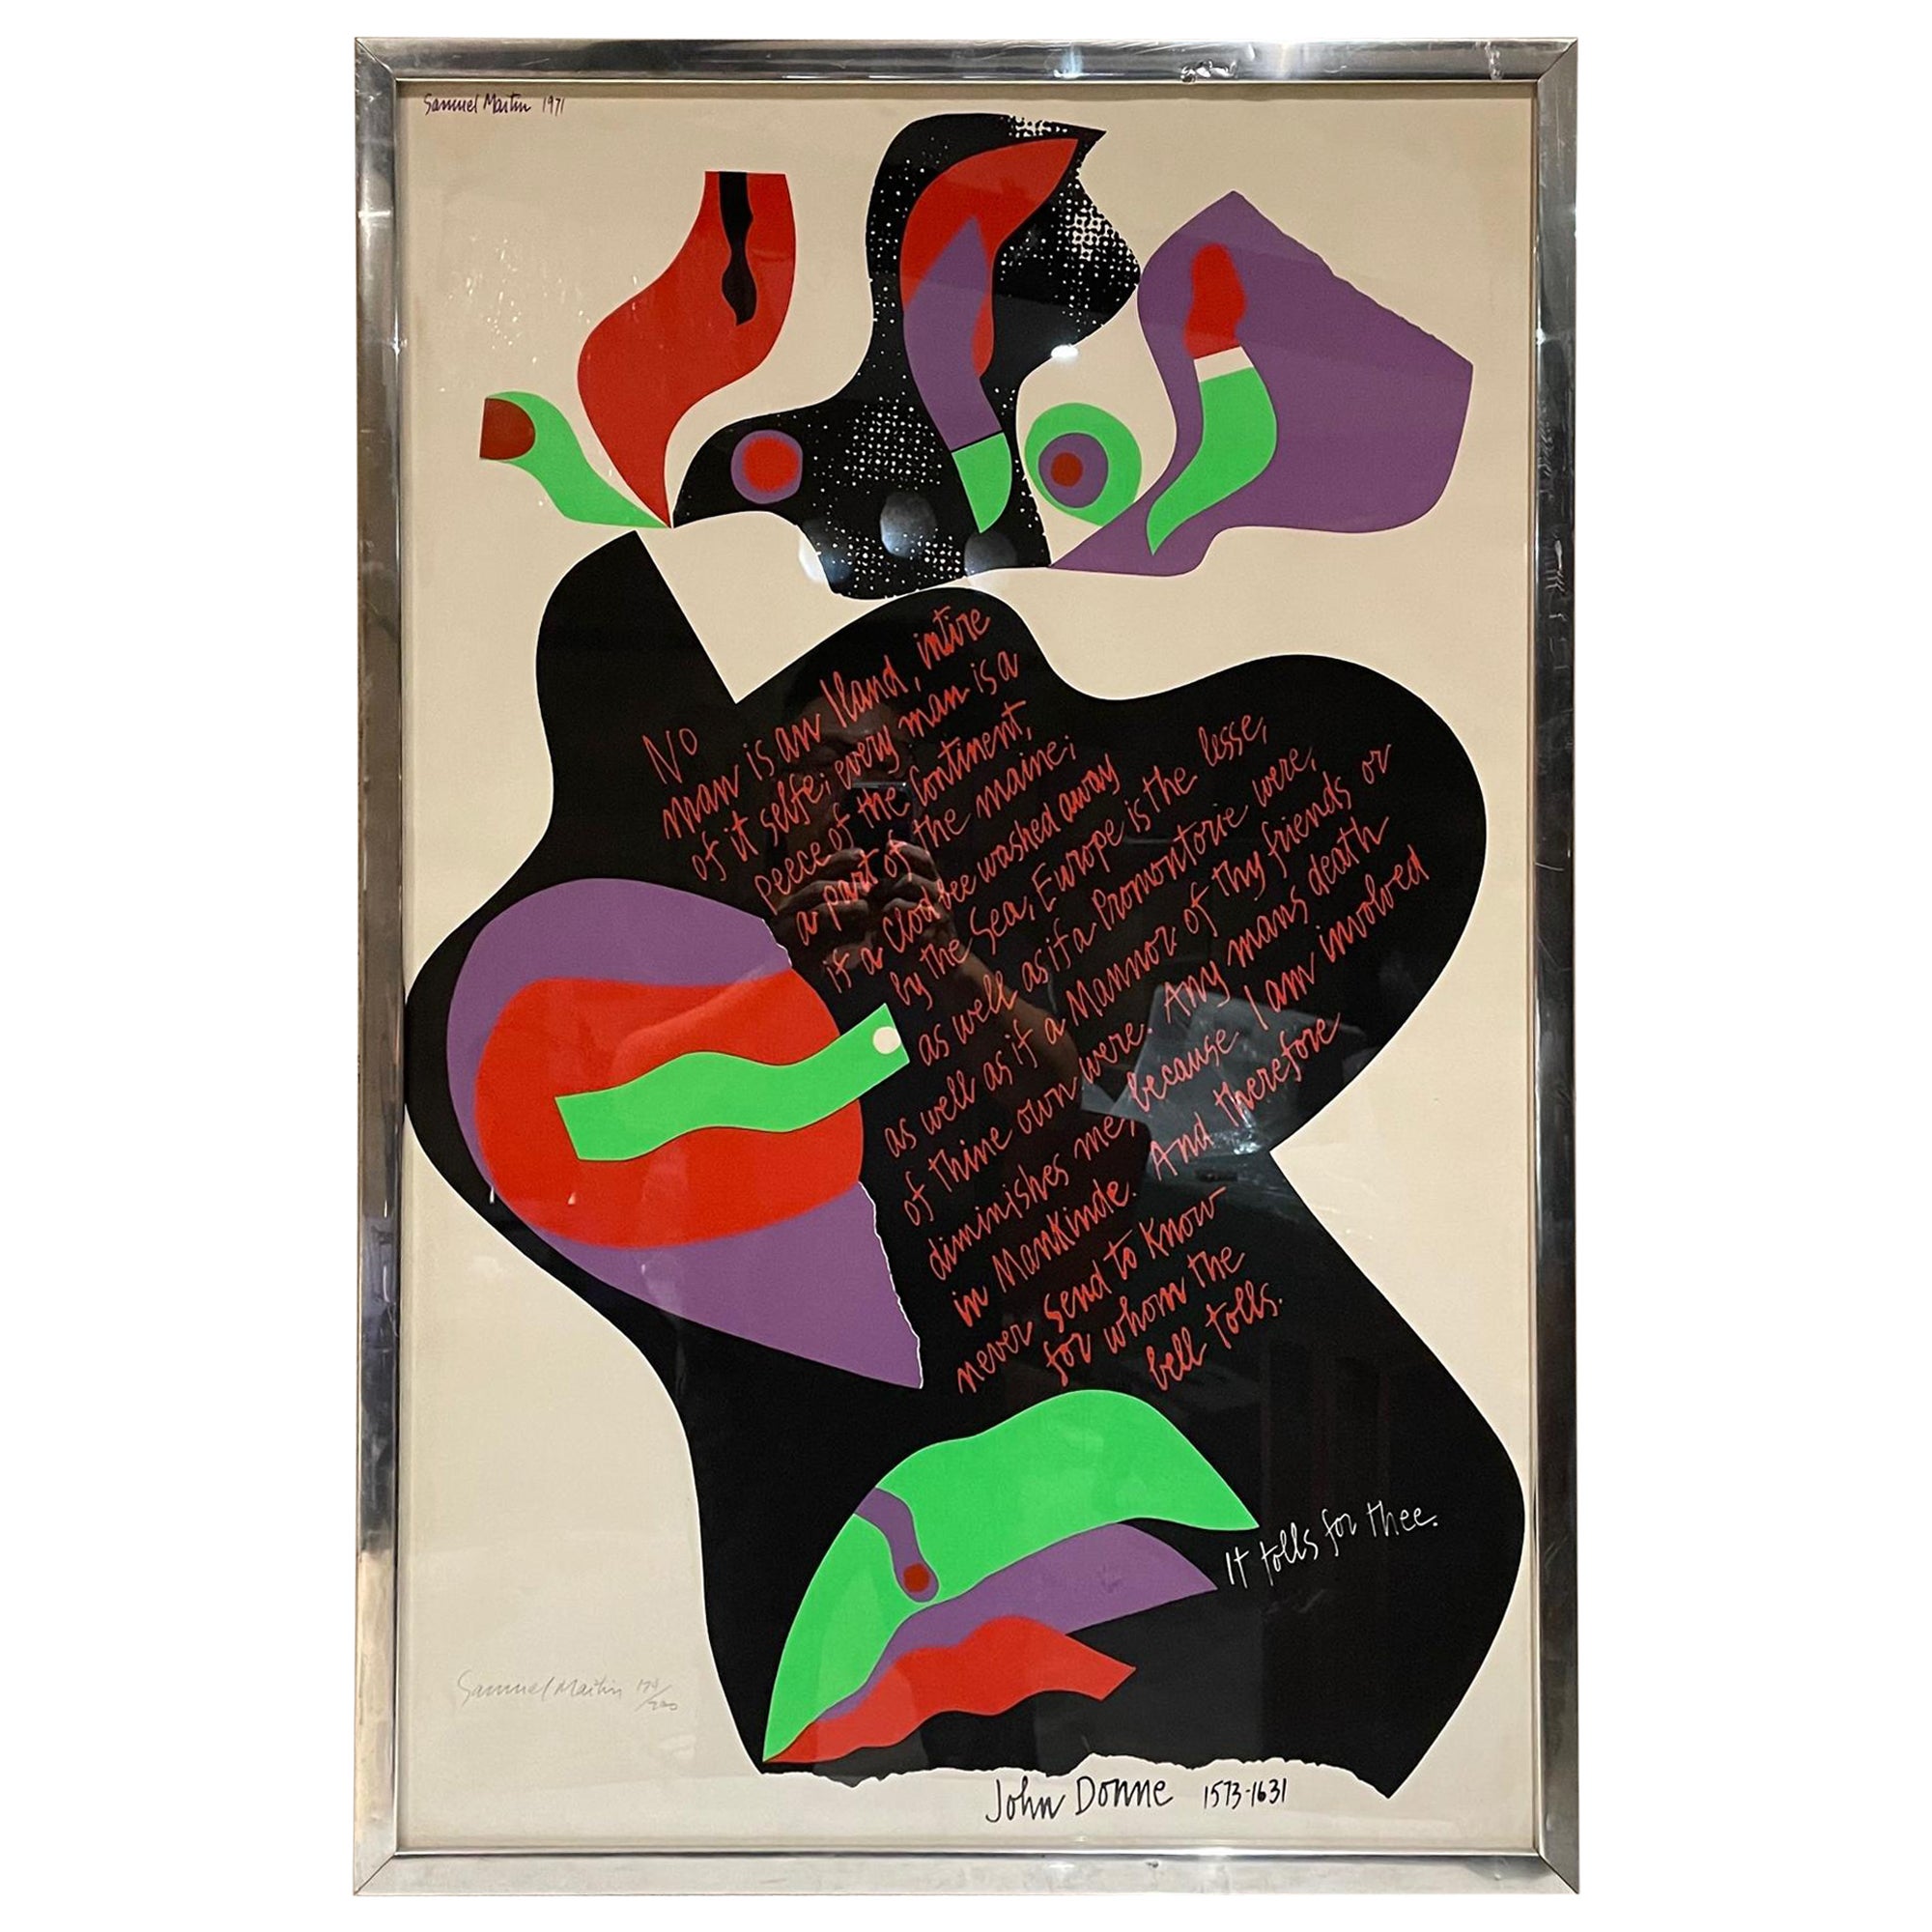 by Samuel Maitin 1971 Poster John Donne for Whom the Bell Tolls in Vivid Color